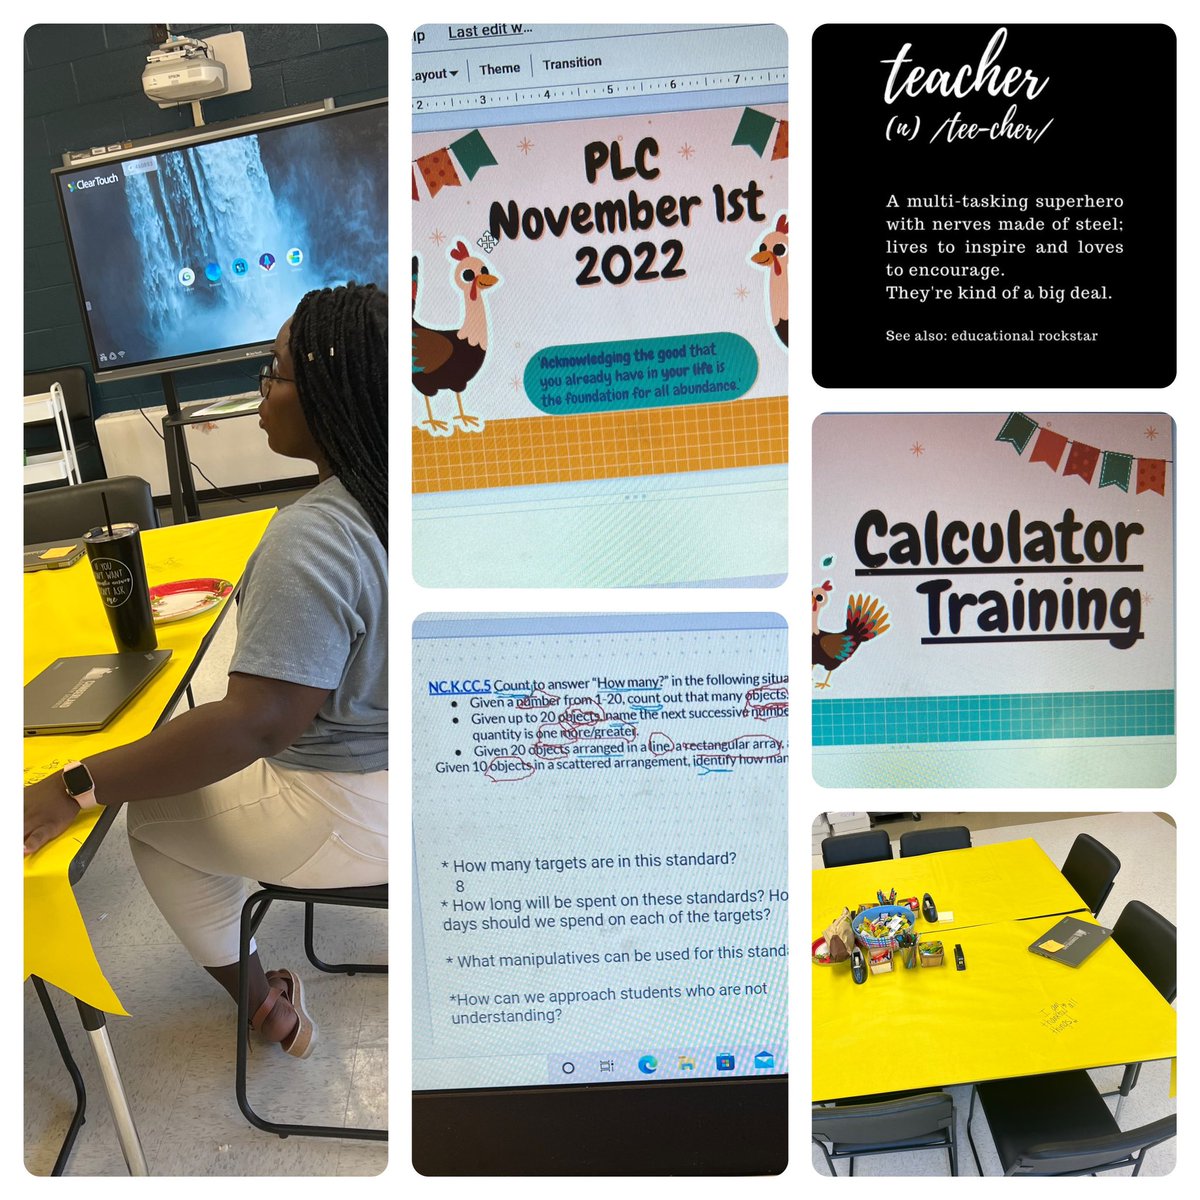 Such a great day in PLCs today! We worked on unpacking upcoming standards; refreshed our calculator skills, and took a moment to write out things we are thankful for! Our teachers are amazing!! @Manchester_Elem @taimonge @mrsgray620 @kimberlytamsett